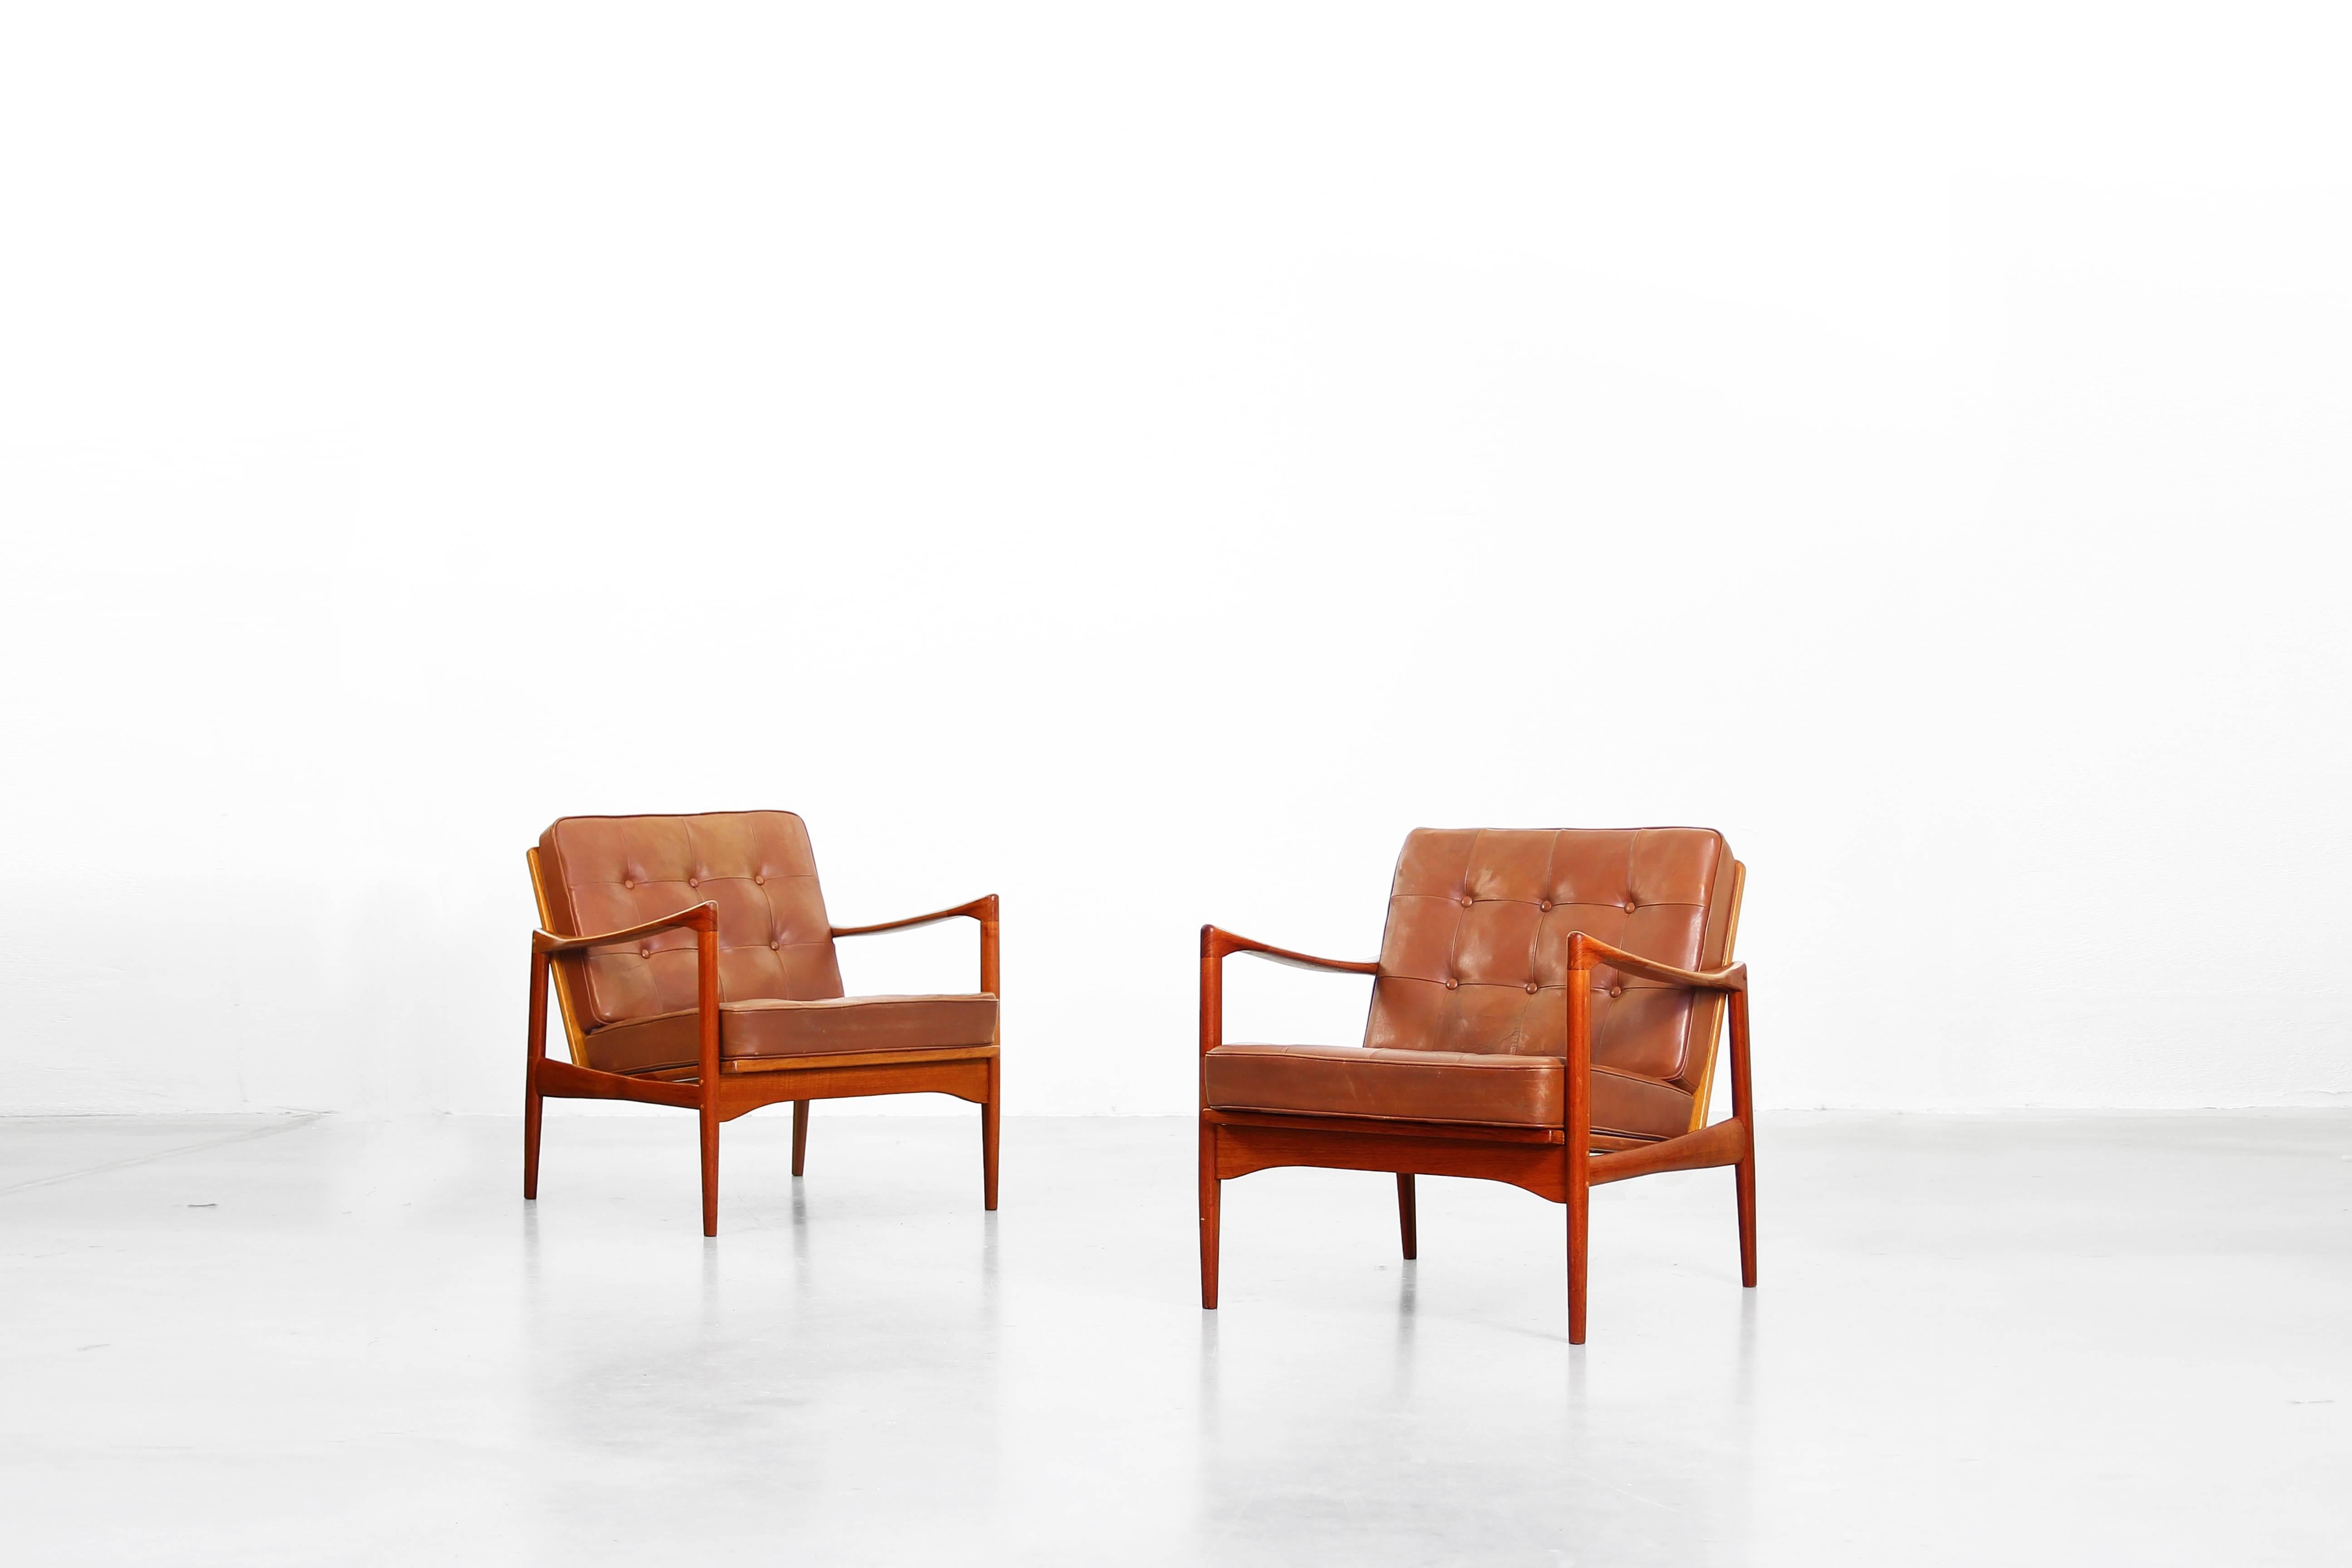 A beautiful pair of Lounge Chairs designed by Ib Kofod Larsen and produces by OPE Sweden in the 1960ies.
The chairs are made of teak and the cushions are covered with brown leather (original), very good condition.